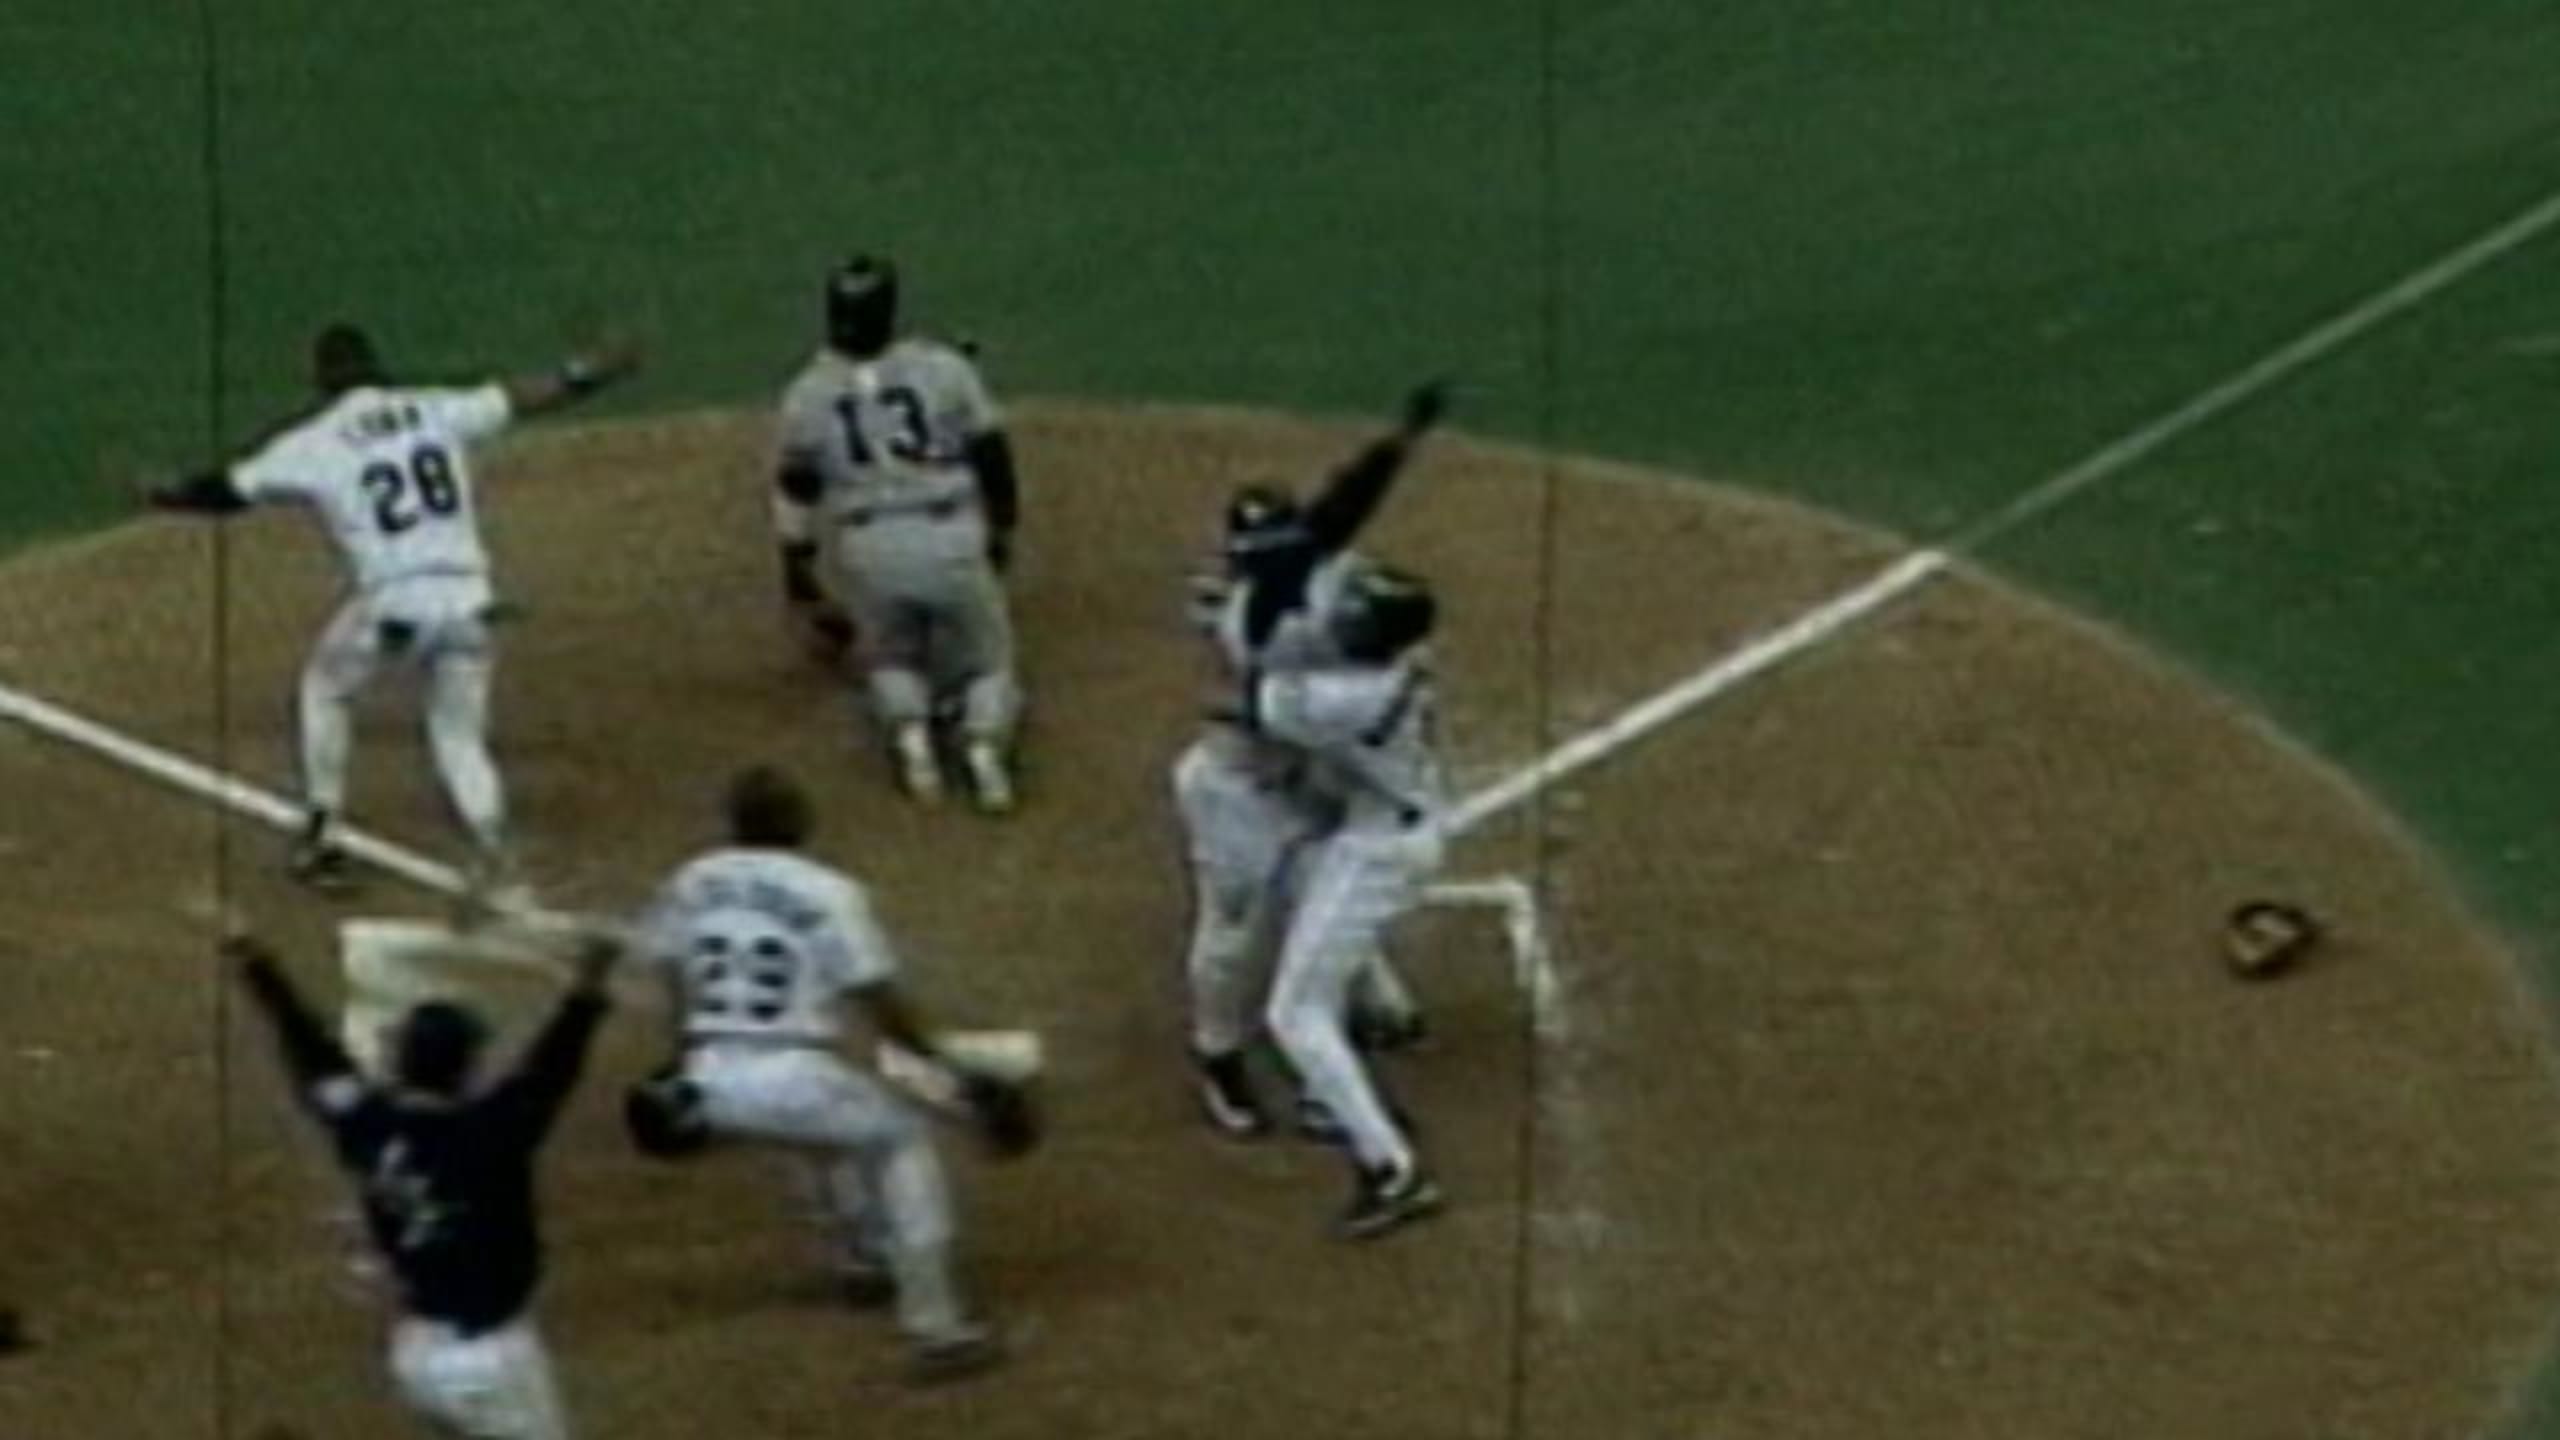 Yankees GIFs: Looking back on the craziness of the Flip Game (2001 ALDS  Game 3) - Pinstripe Alley